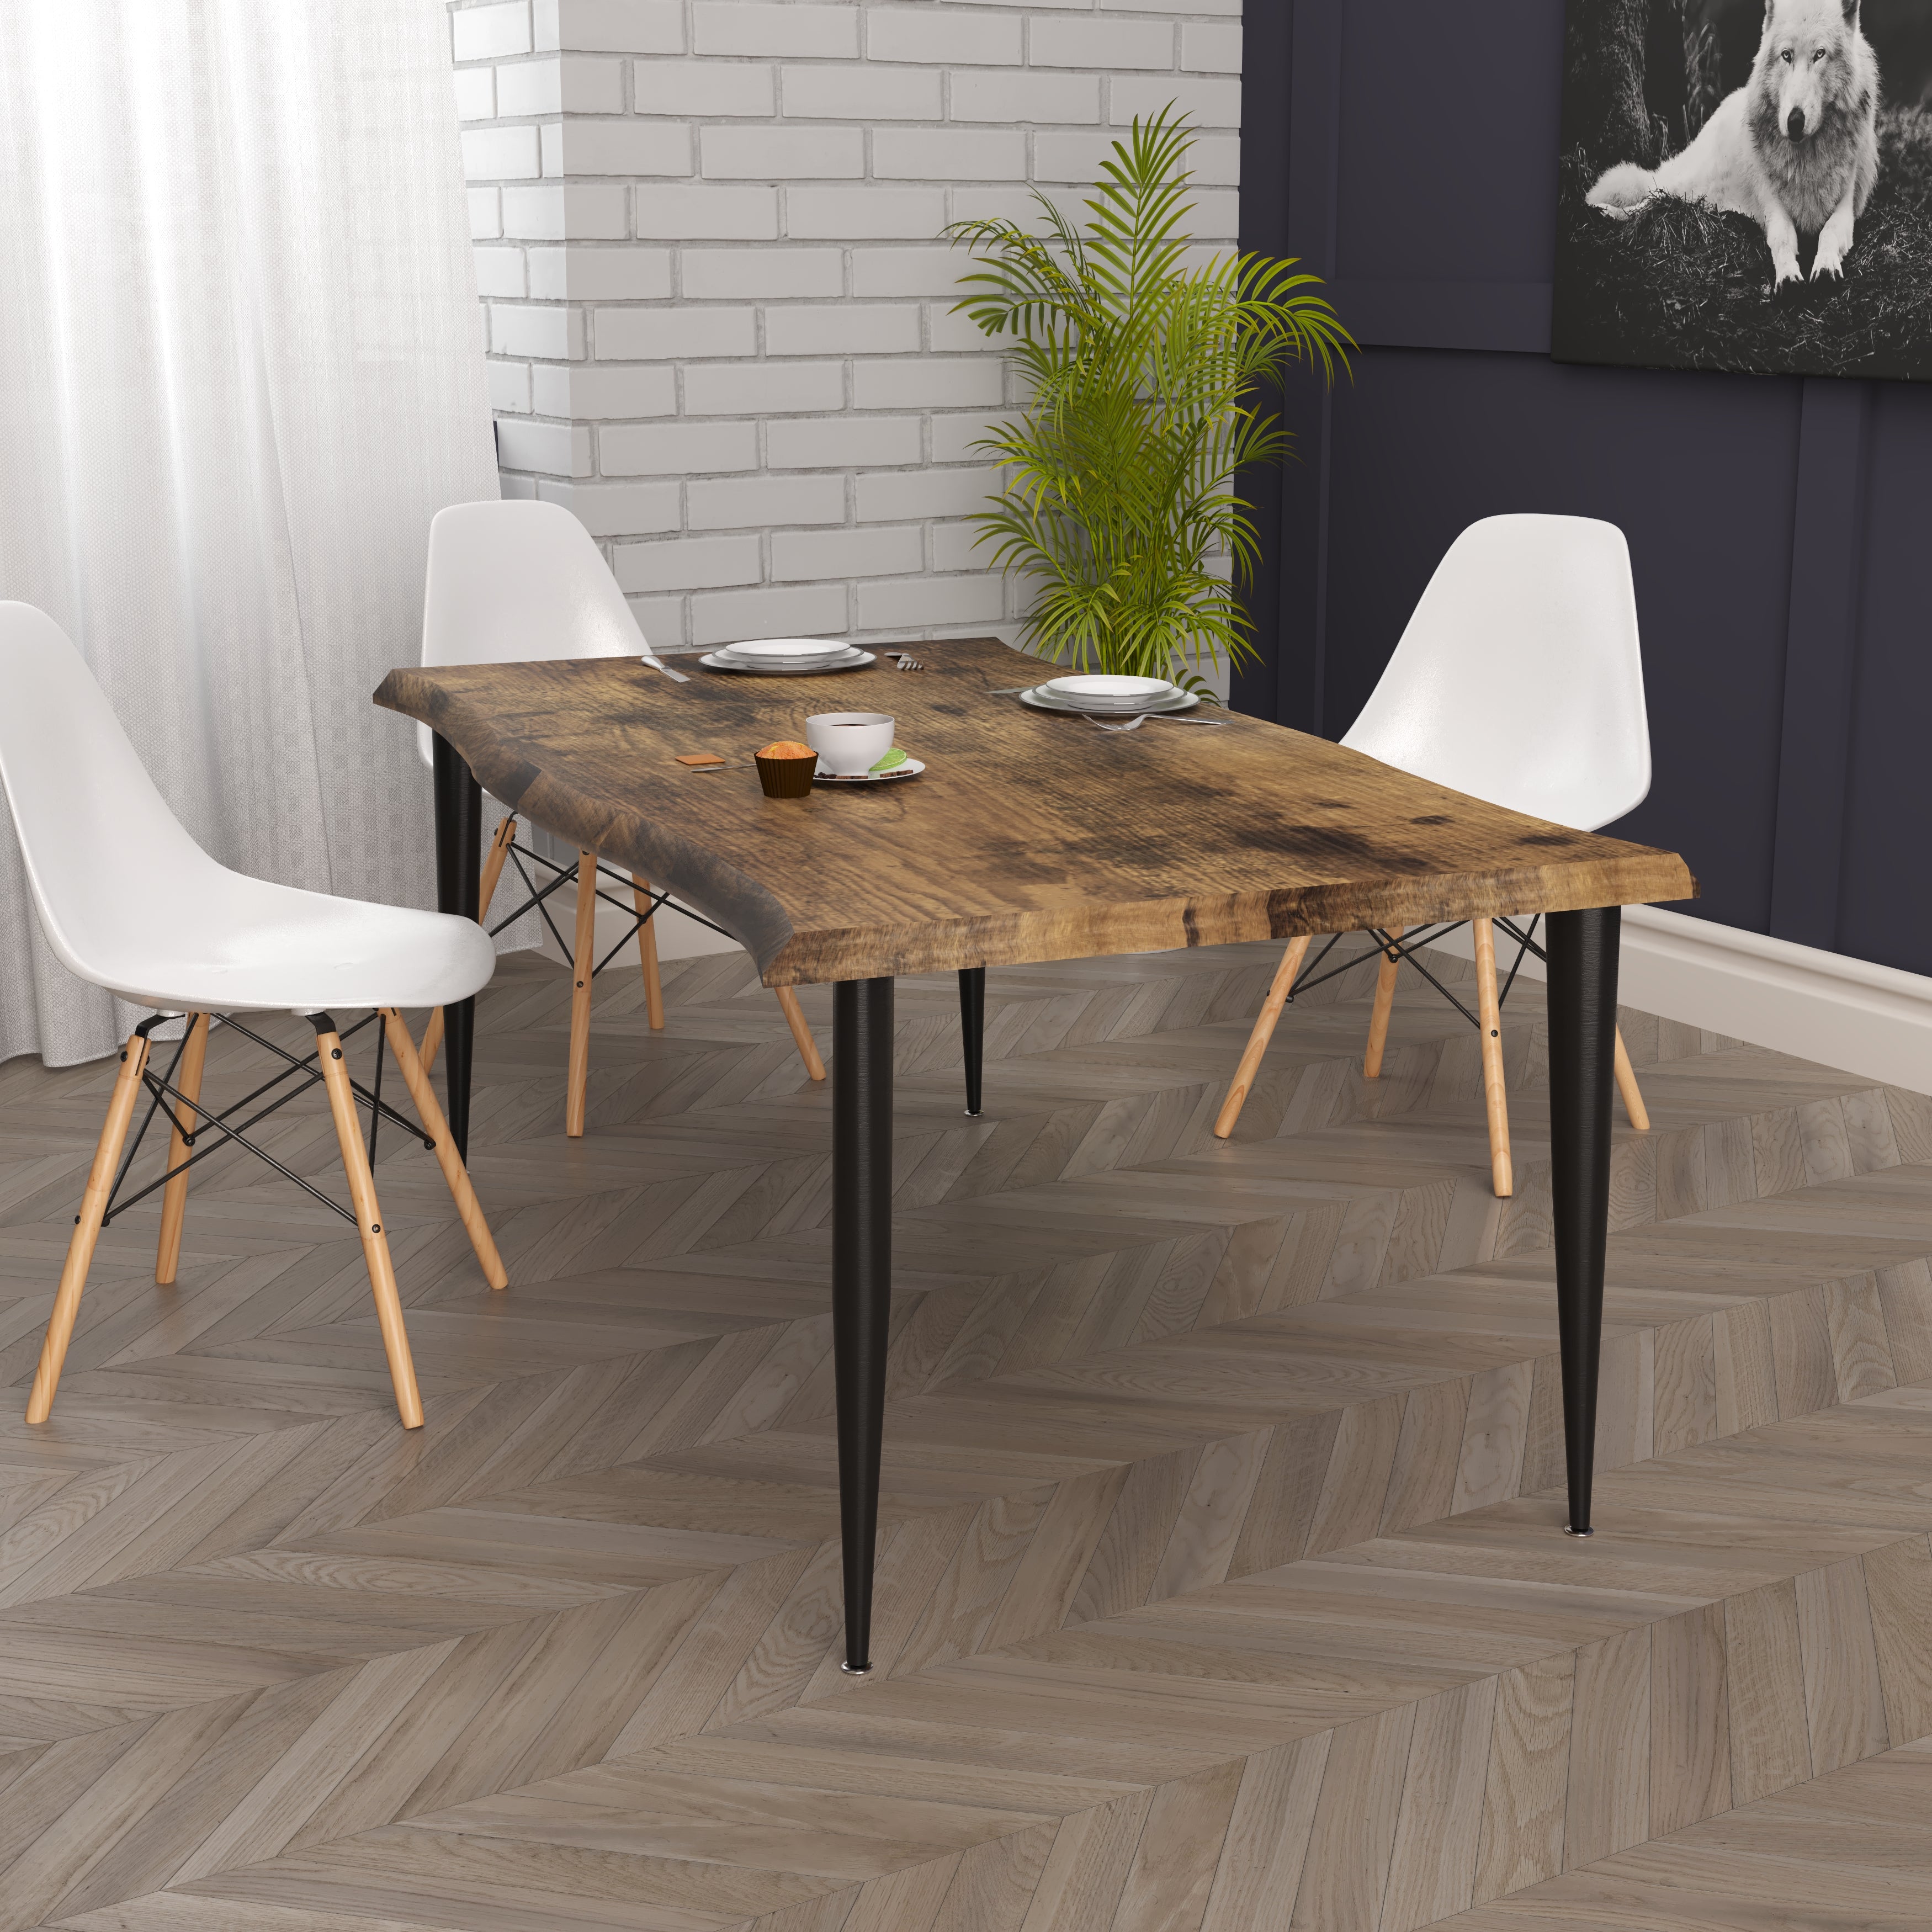 The Velets Lia Dining Table MDF Top With Tapered Legs